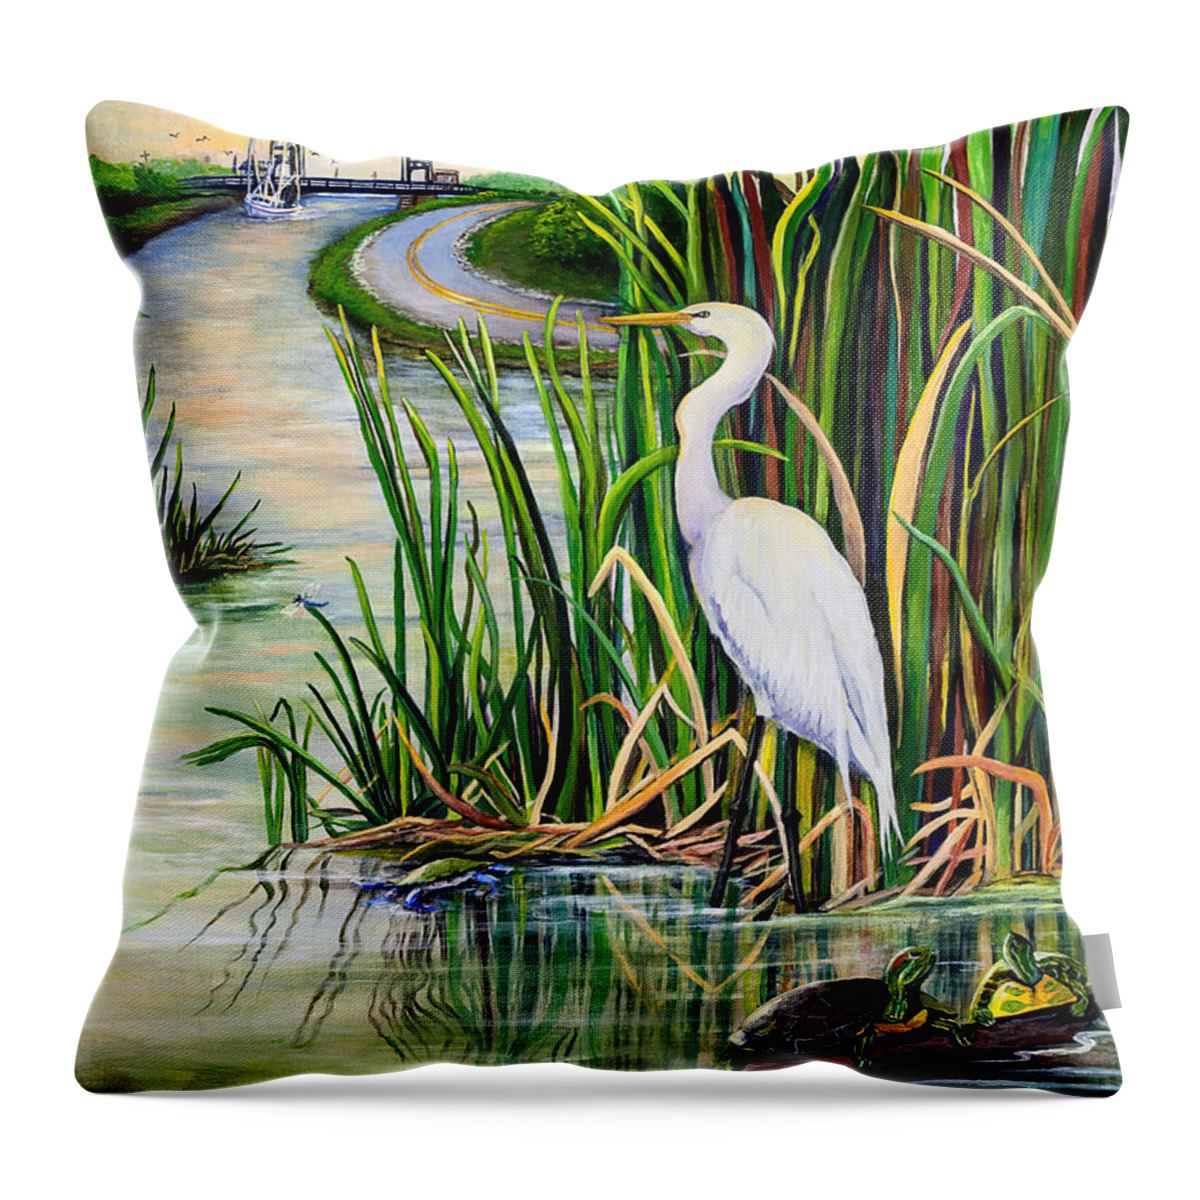 Louisiana Throw Pillow featuring the painting Louisiana Wetlands by Elaine Hodges